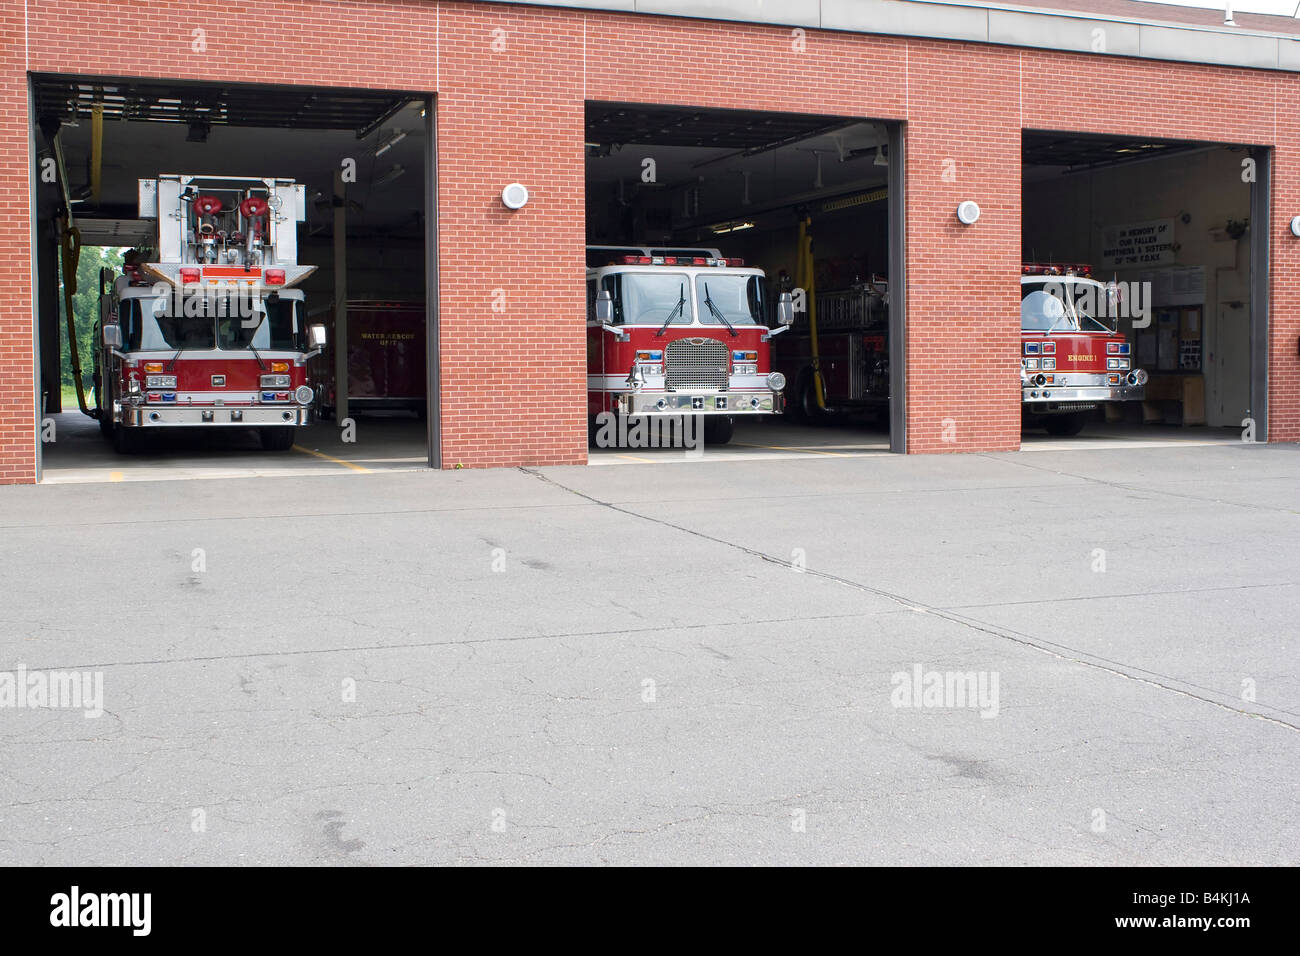 Three garage bays of fire house open with firetrucks on disply Stock Photo